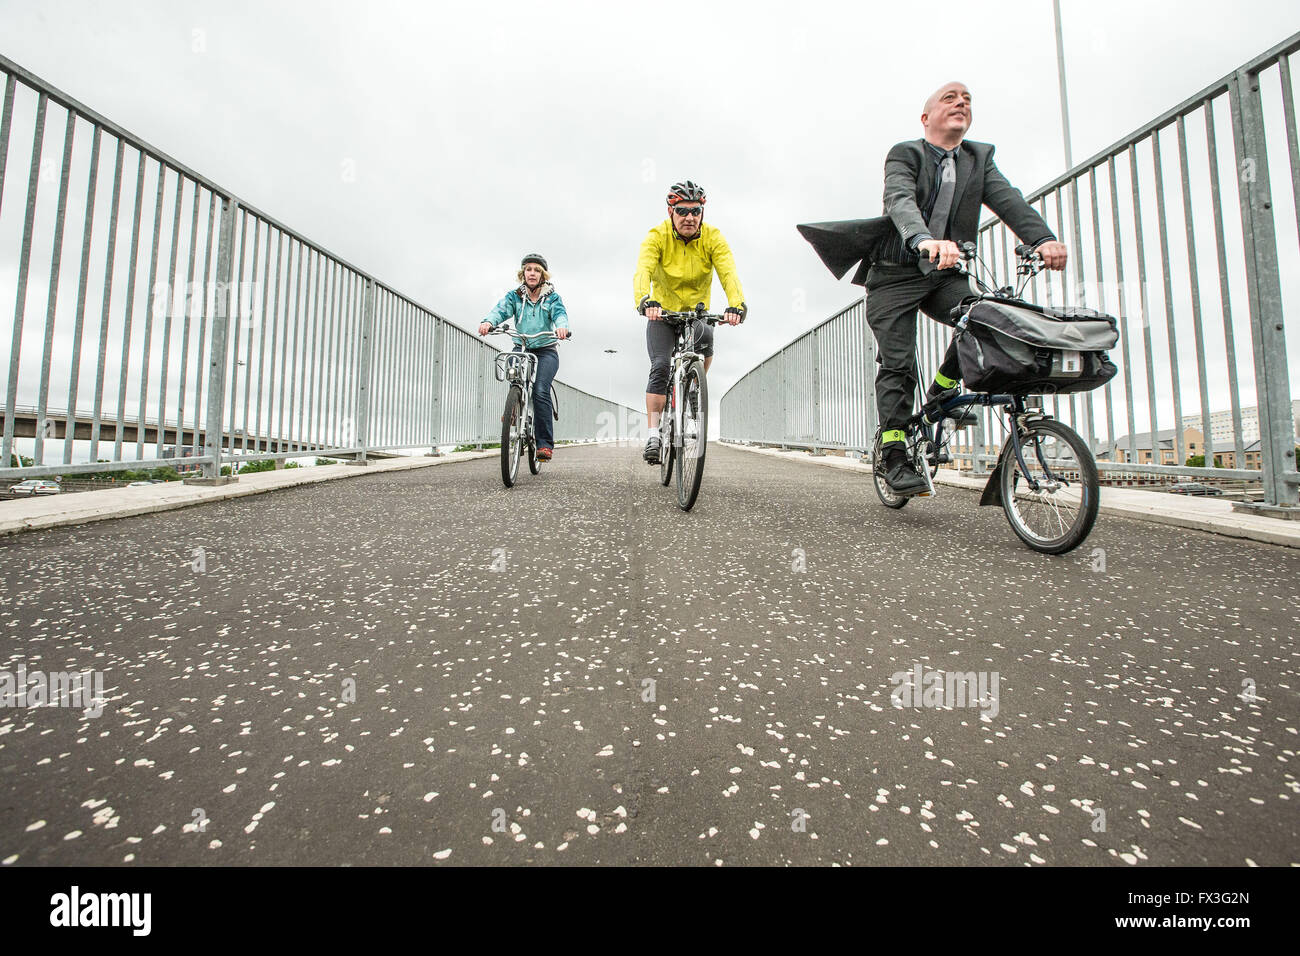 Cyclists commuting on cycle paths Stock Photo